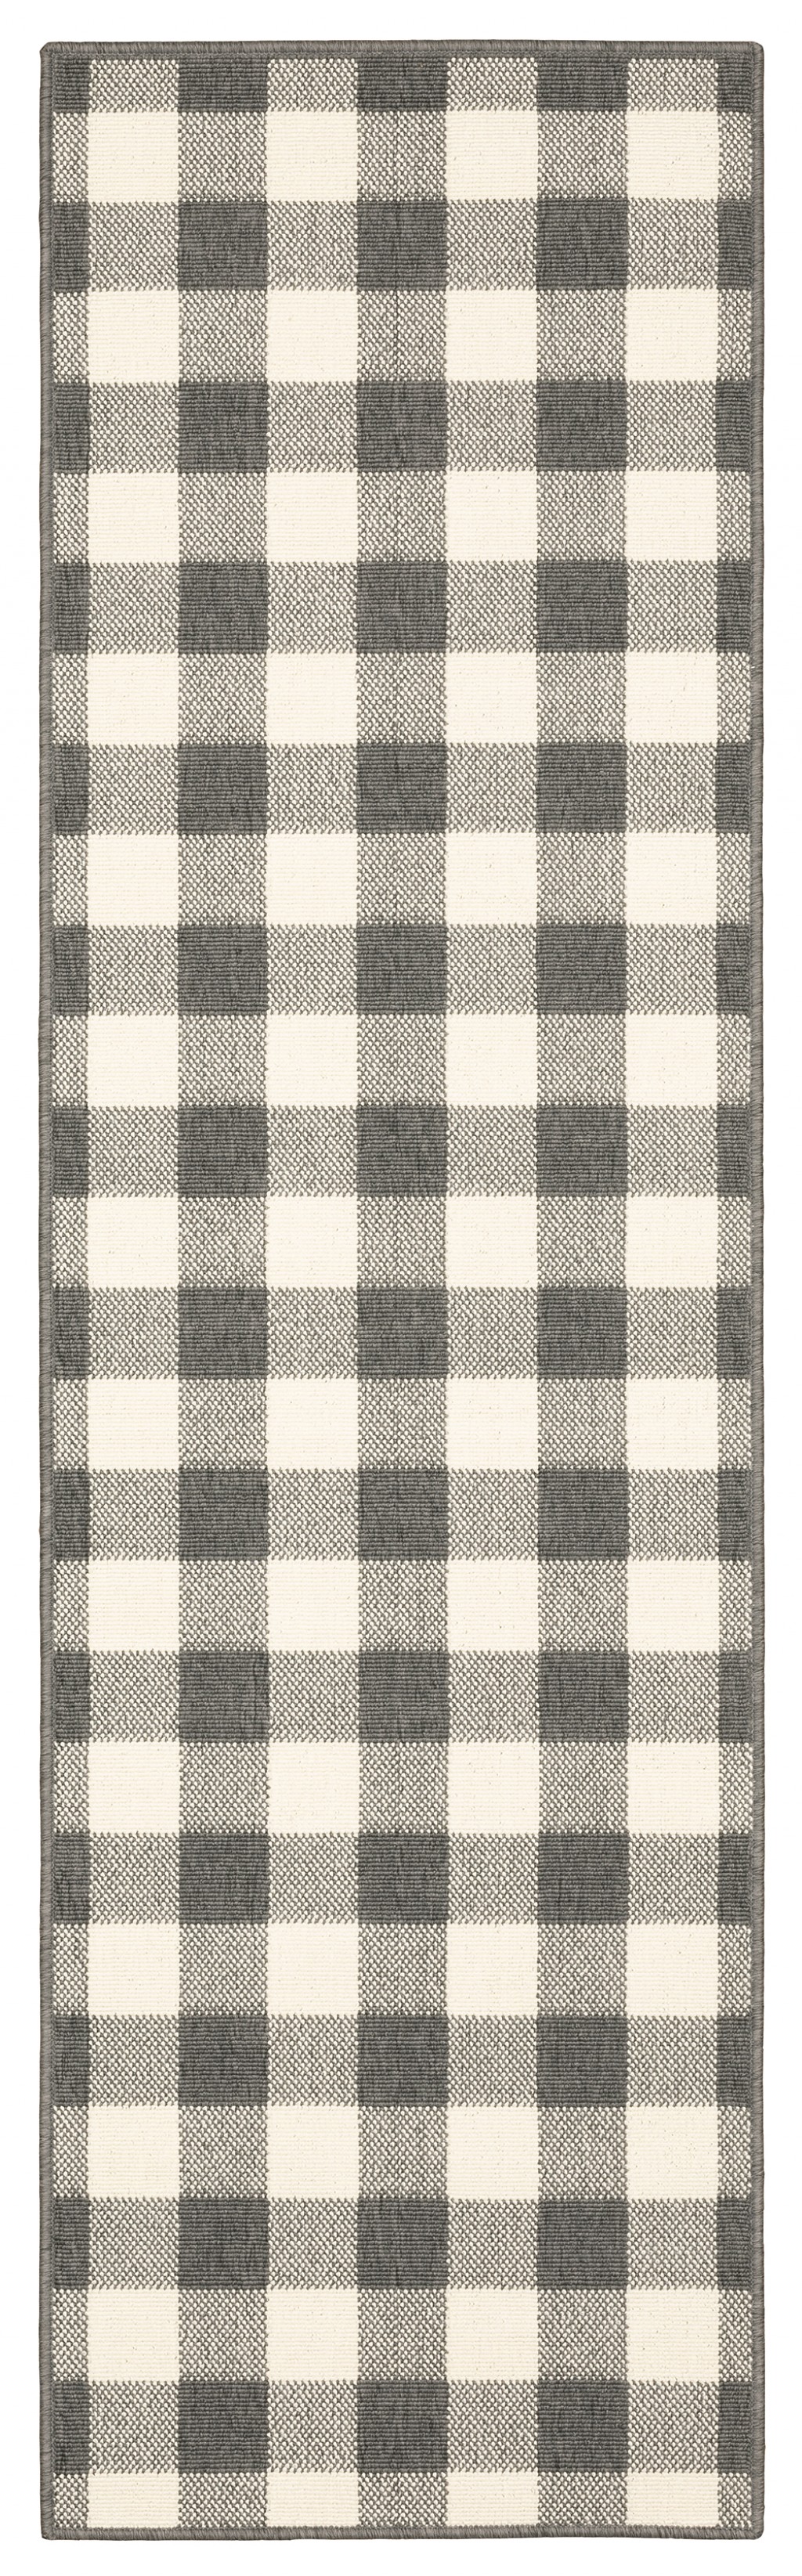 2' X 8' Gray and Ivory Indoor Outdoor Area Rug-389524-1